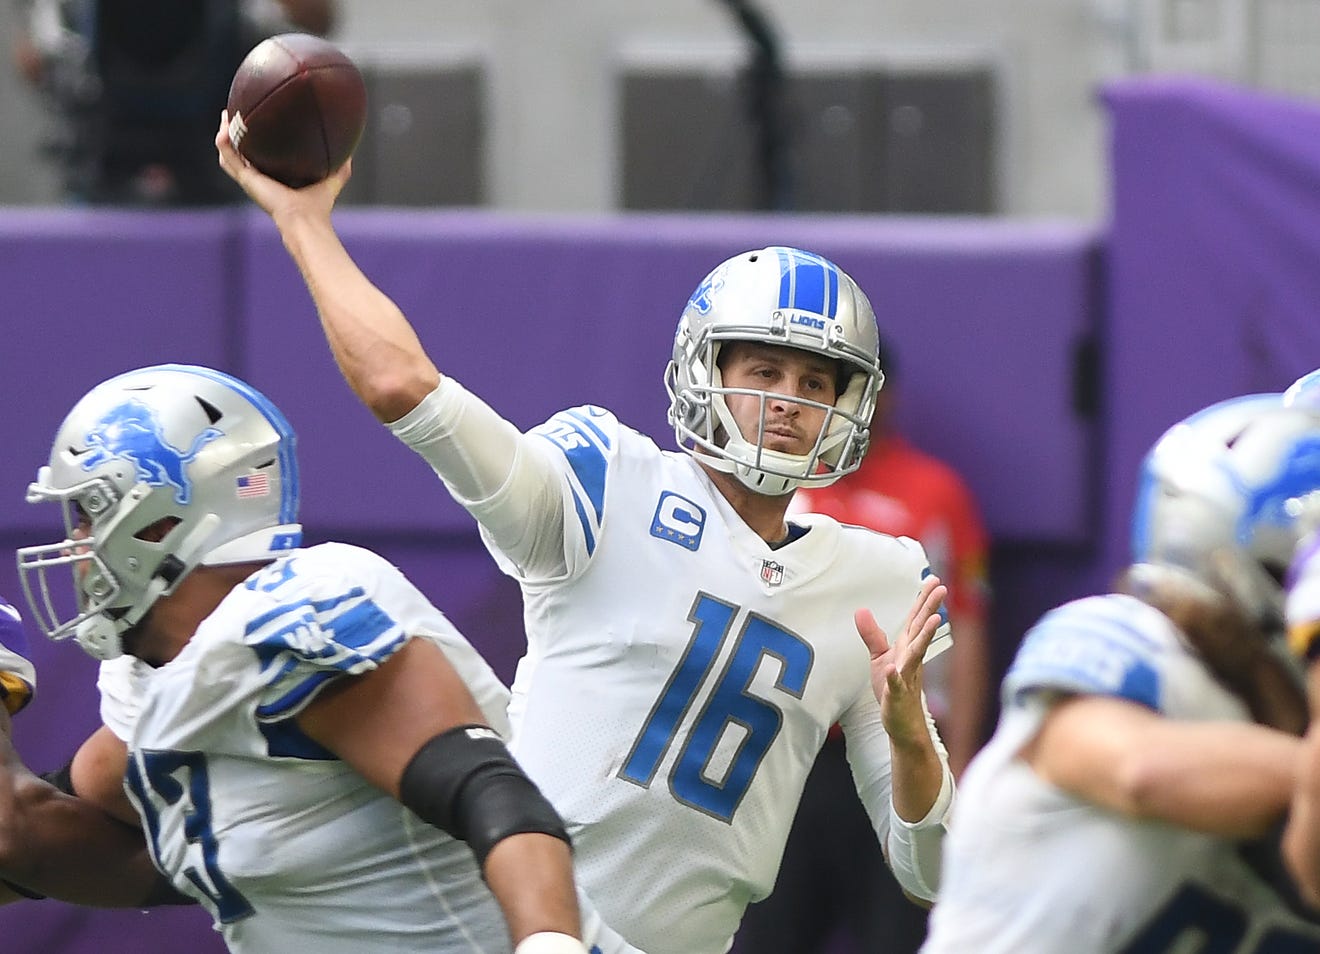 Lions quarterback Jared Goff is active, and will start Thursday against the Bears.